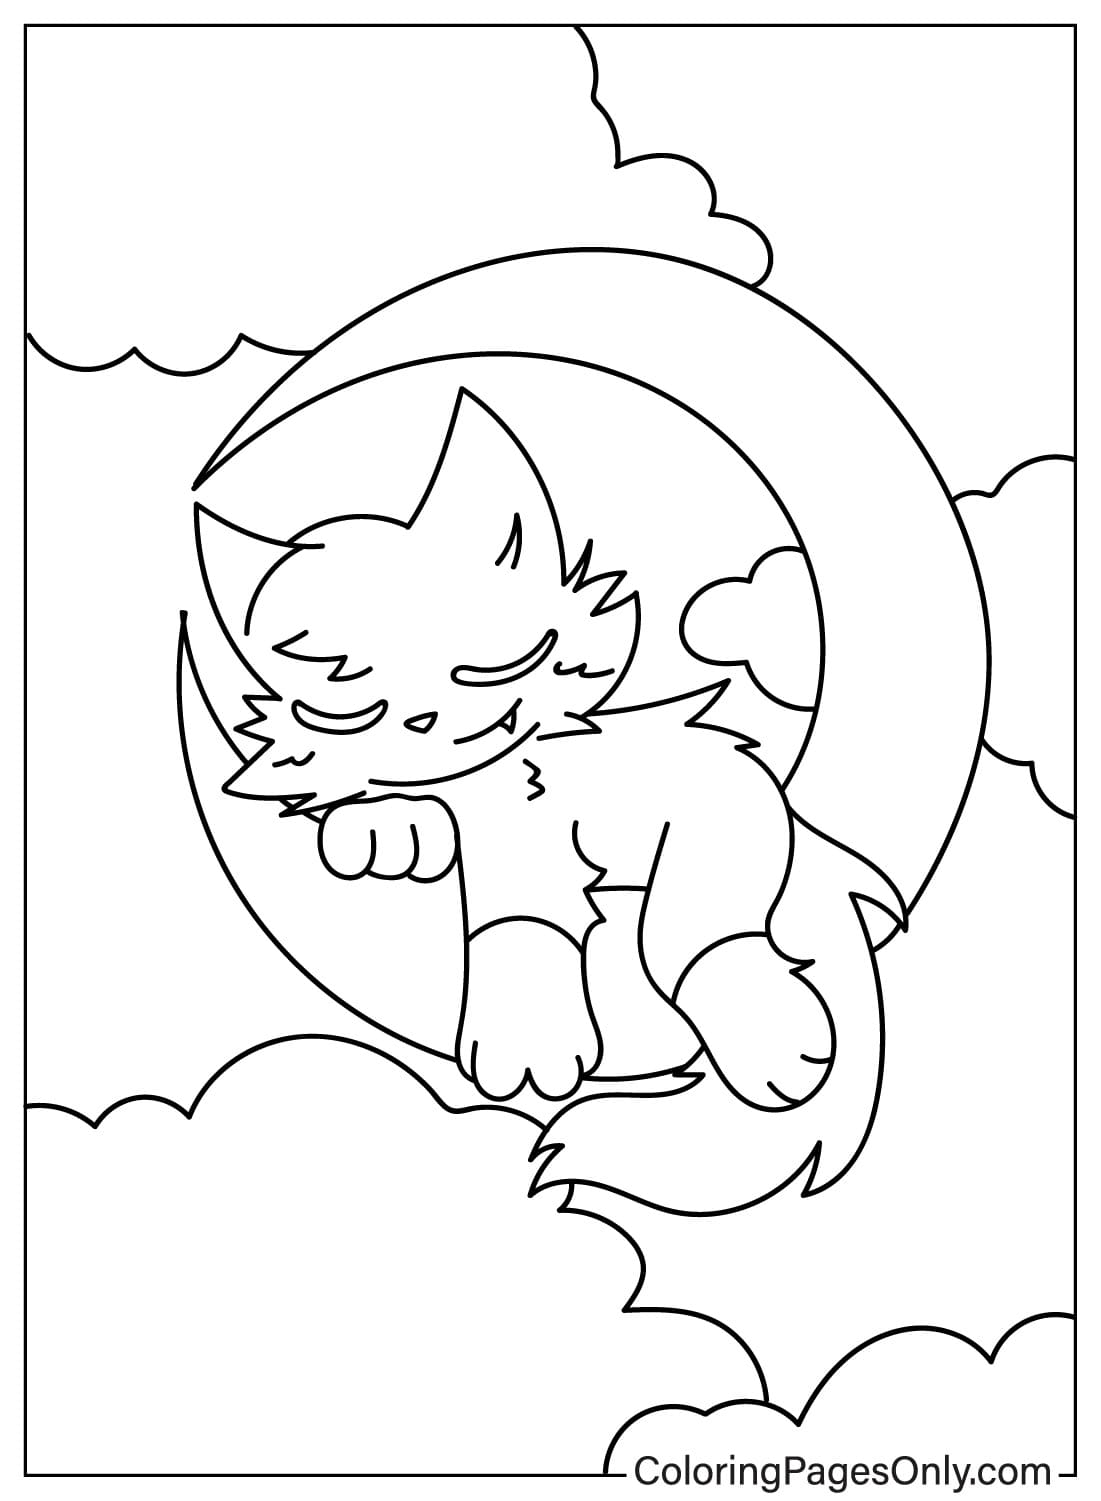 CatNap Coloring Page Free from CatNap